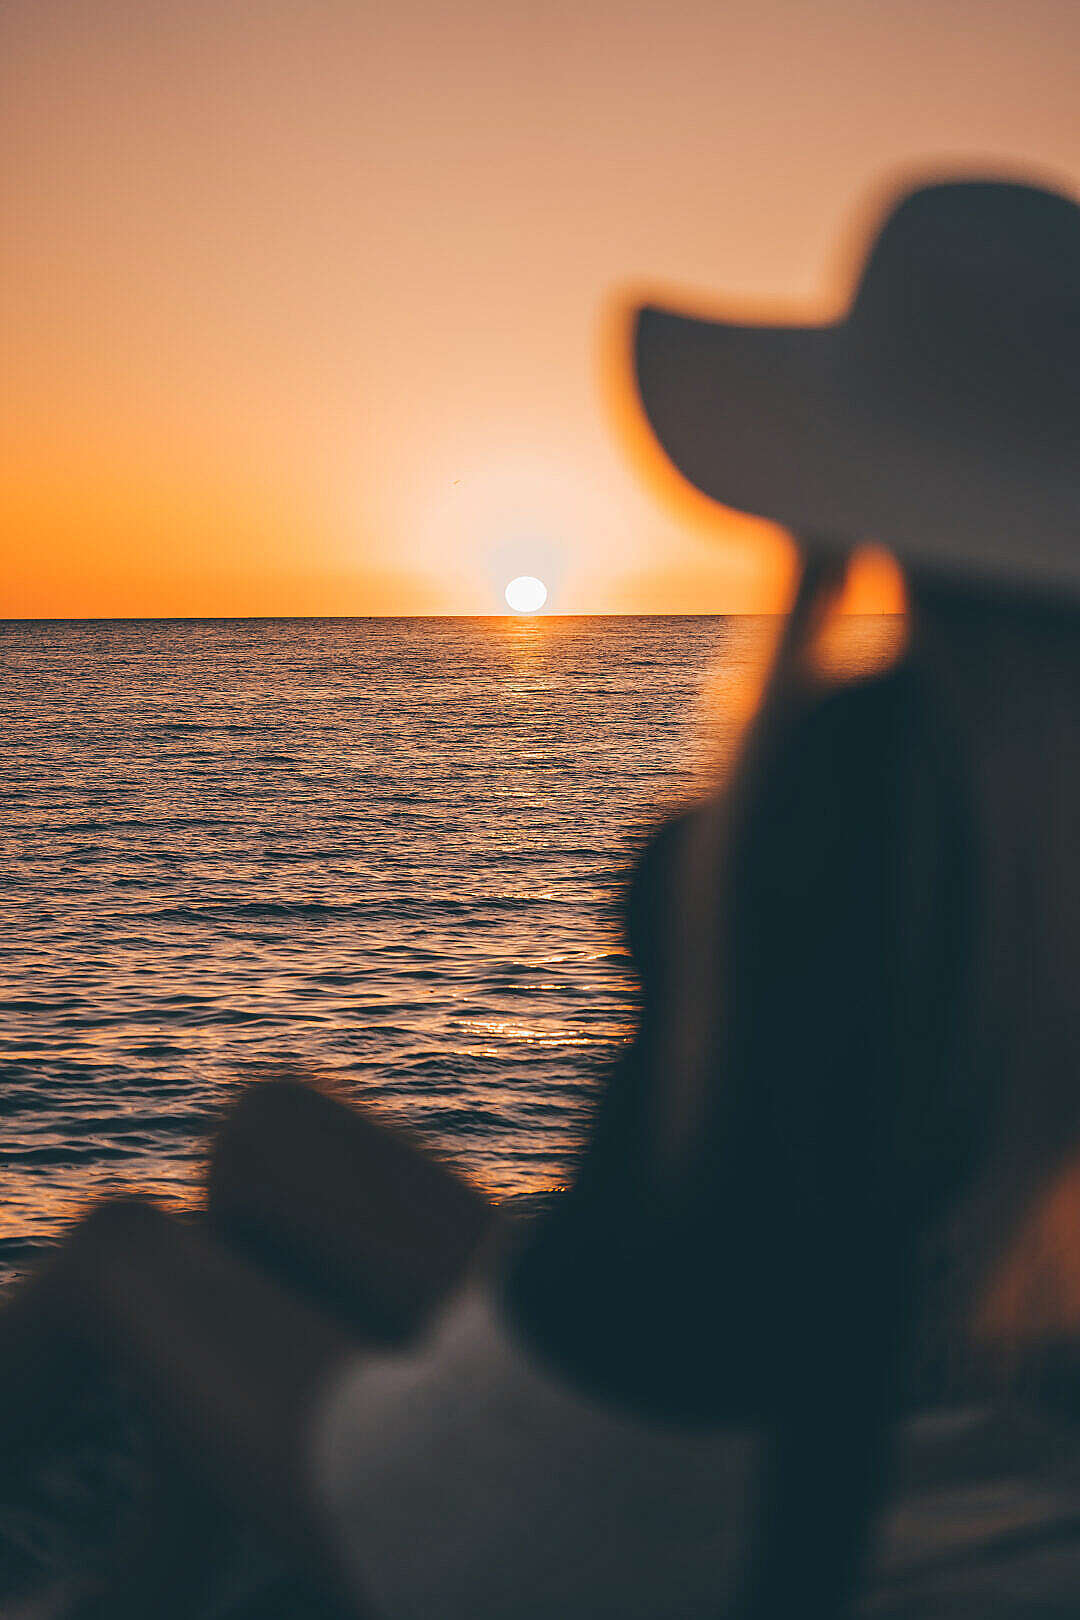 Download Woman in a Hat Looking at Sunset Above The Sea FREE Stock Photo